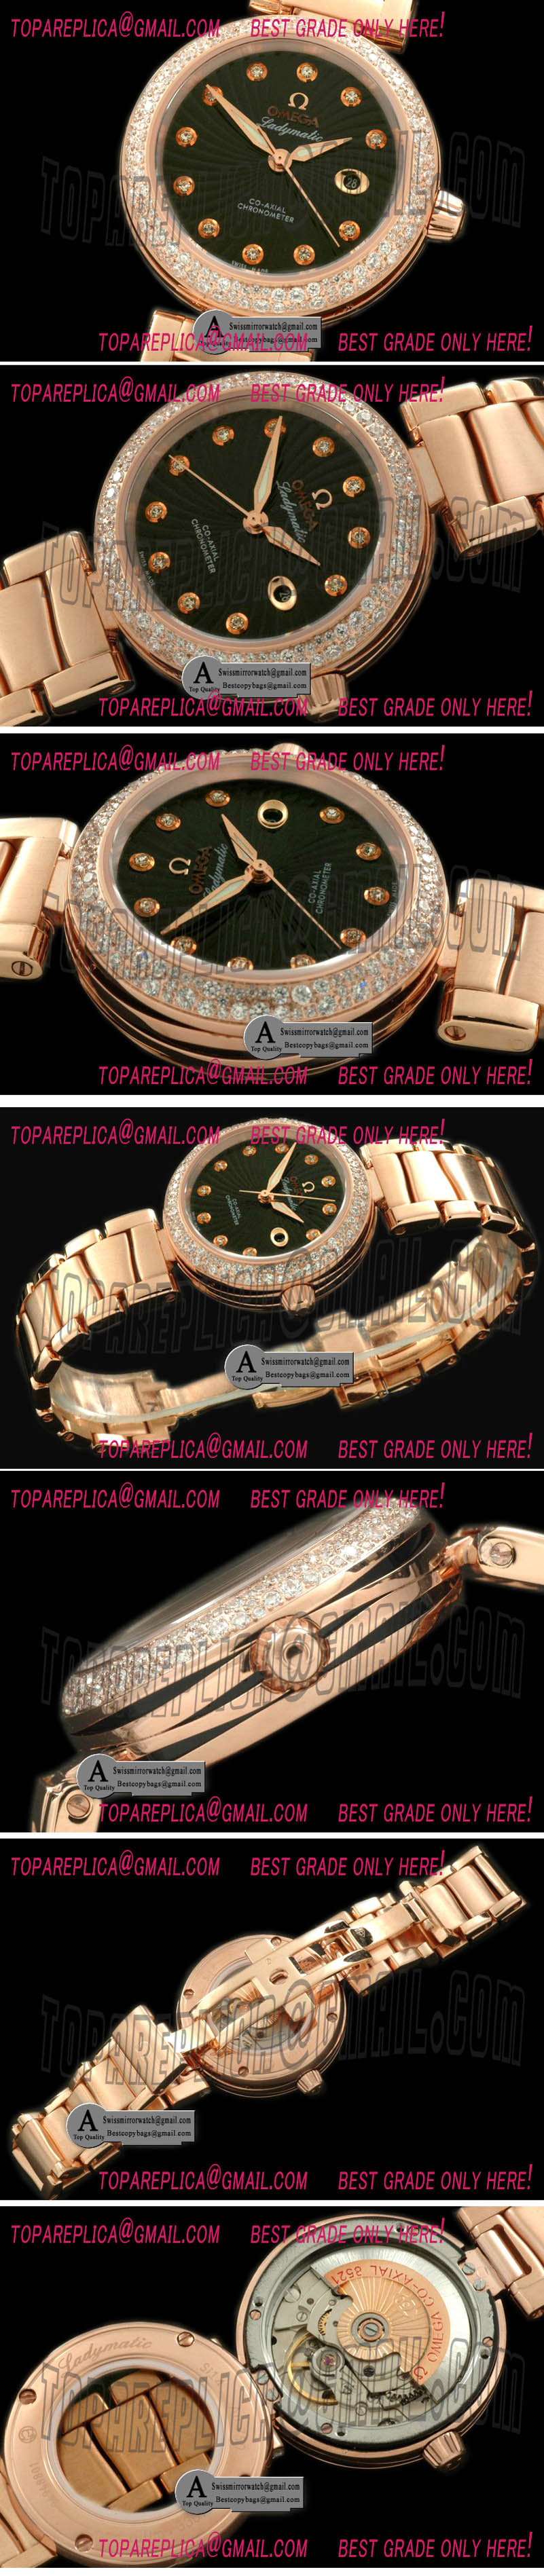 Omega Deville Ladymatic Mid 425.65.34.20.51.001 Rose Gold/Rose Gold Black 2813 21J Replica Watches